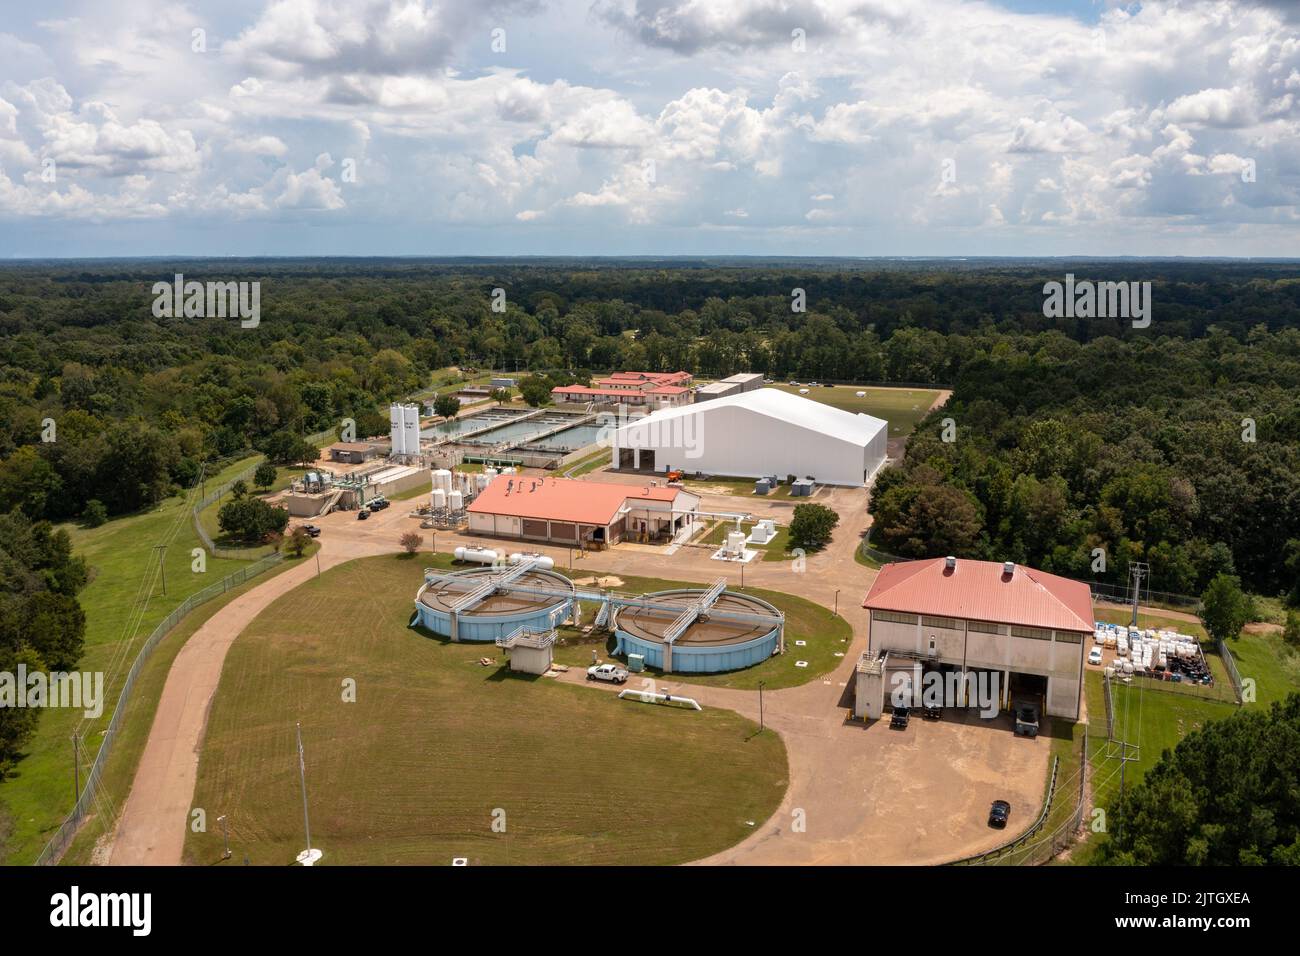 Jackson, MS - August 30, 2022: The O.B. Curtis Water Treatment Facility for the City of Jackson, Mississippi Stock Photo